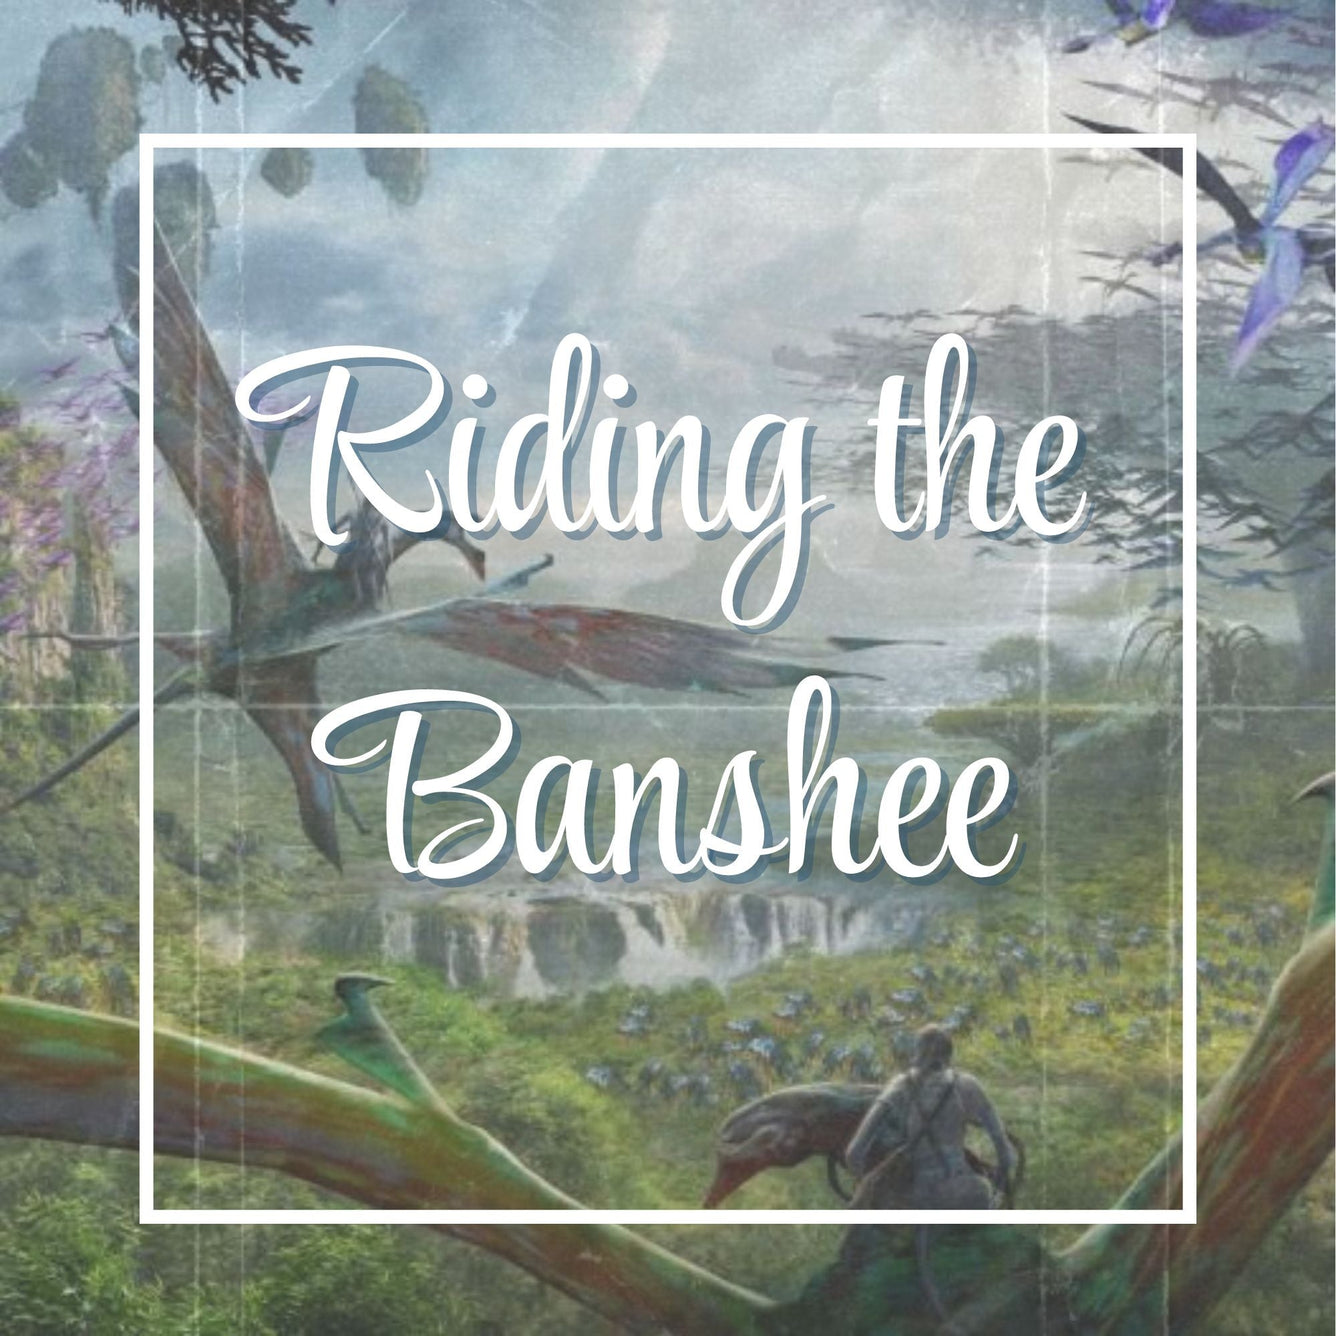 Riding the Banshee | The Columbia Fragrance Co.